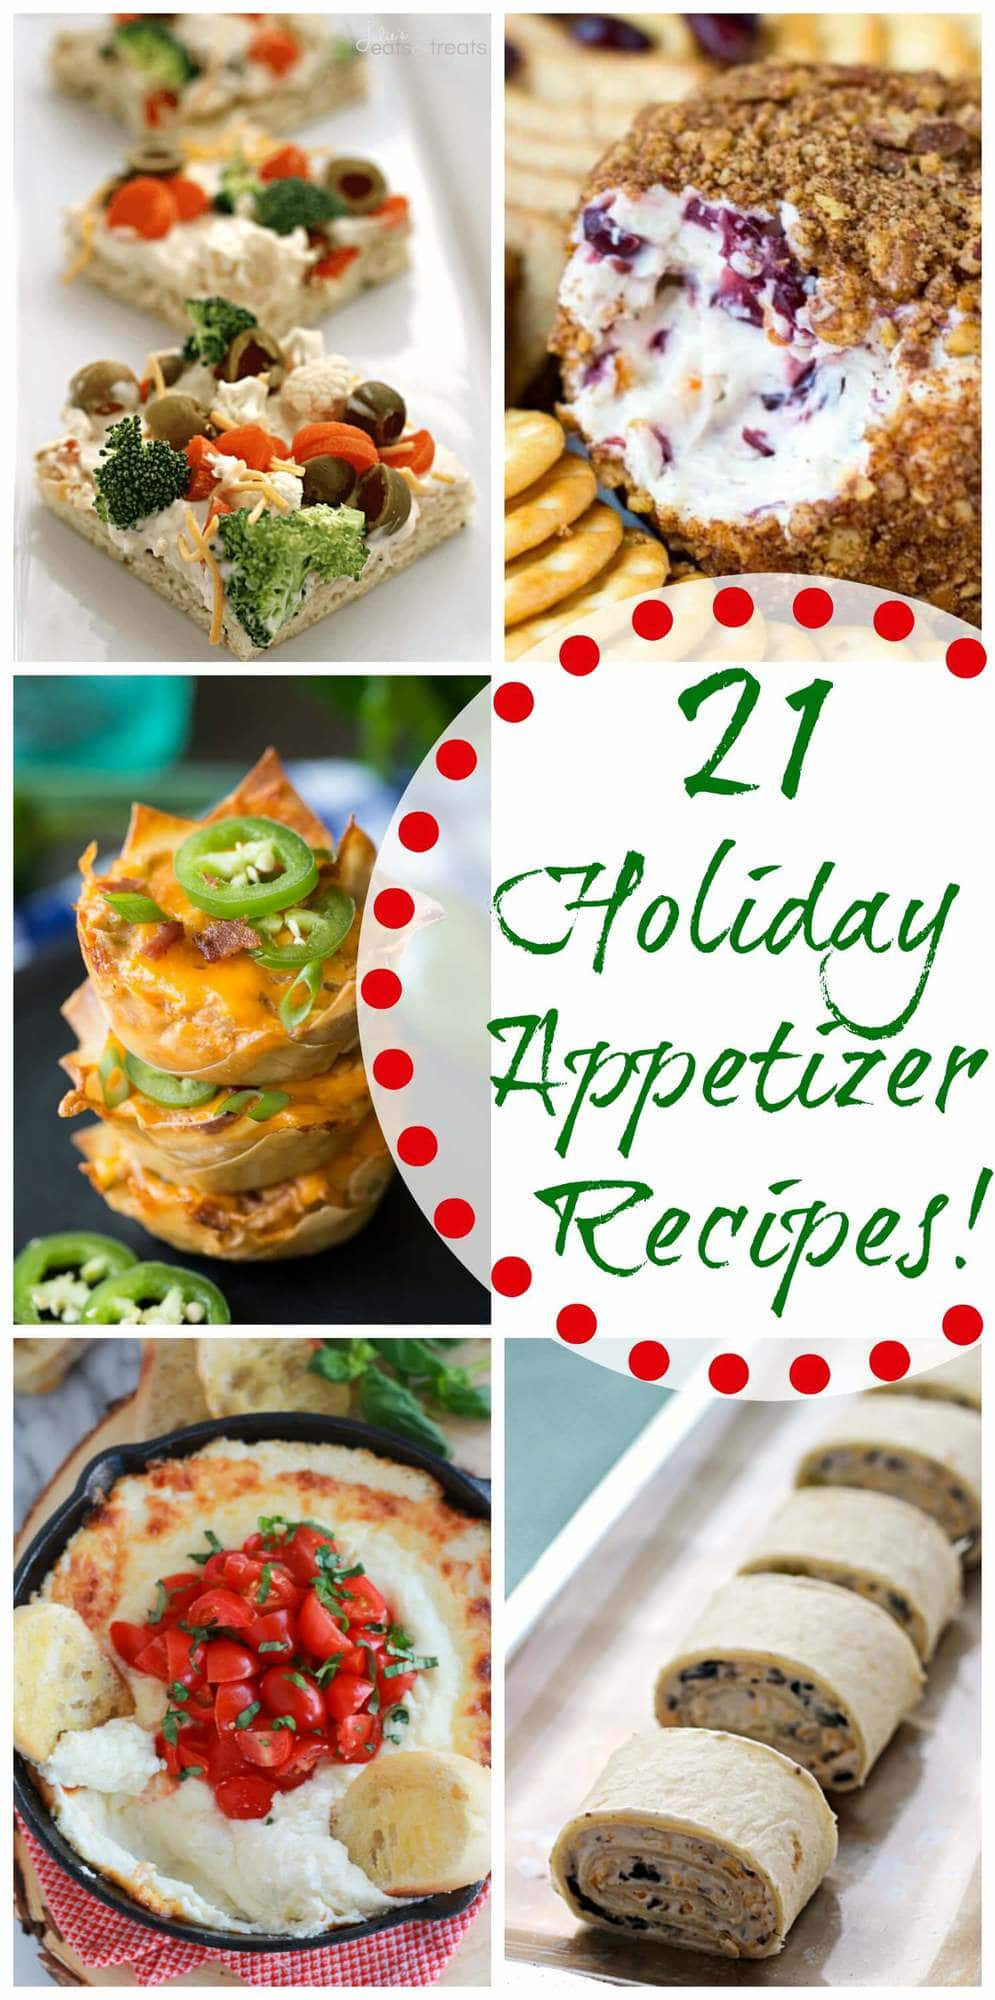 Christmas Appetizers On Pinterest
 21 Holiday Appetizer Recipes Giveaway Julie s Eats